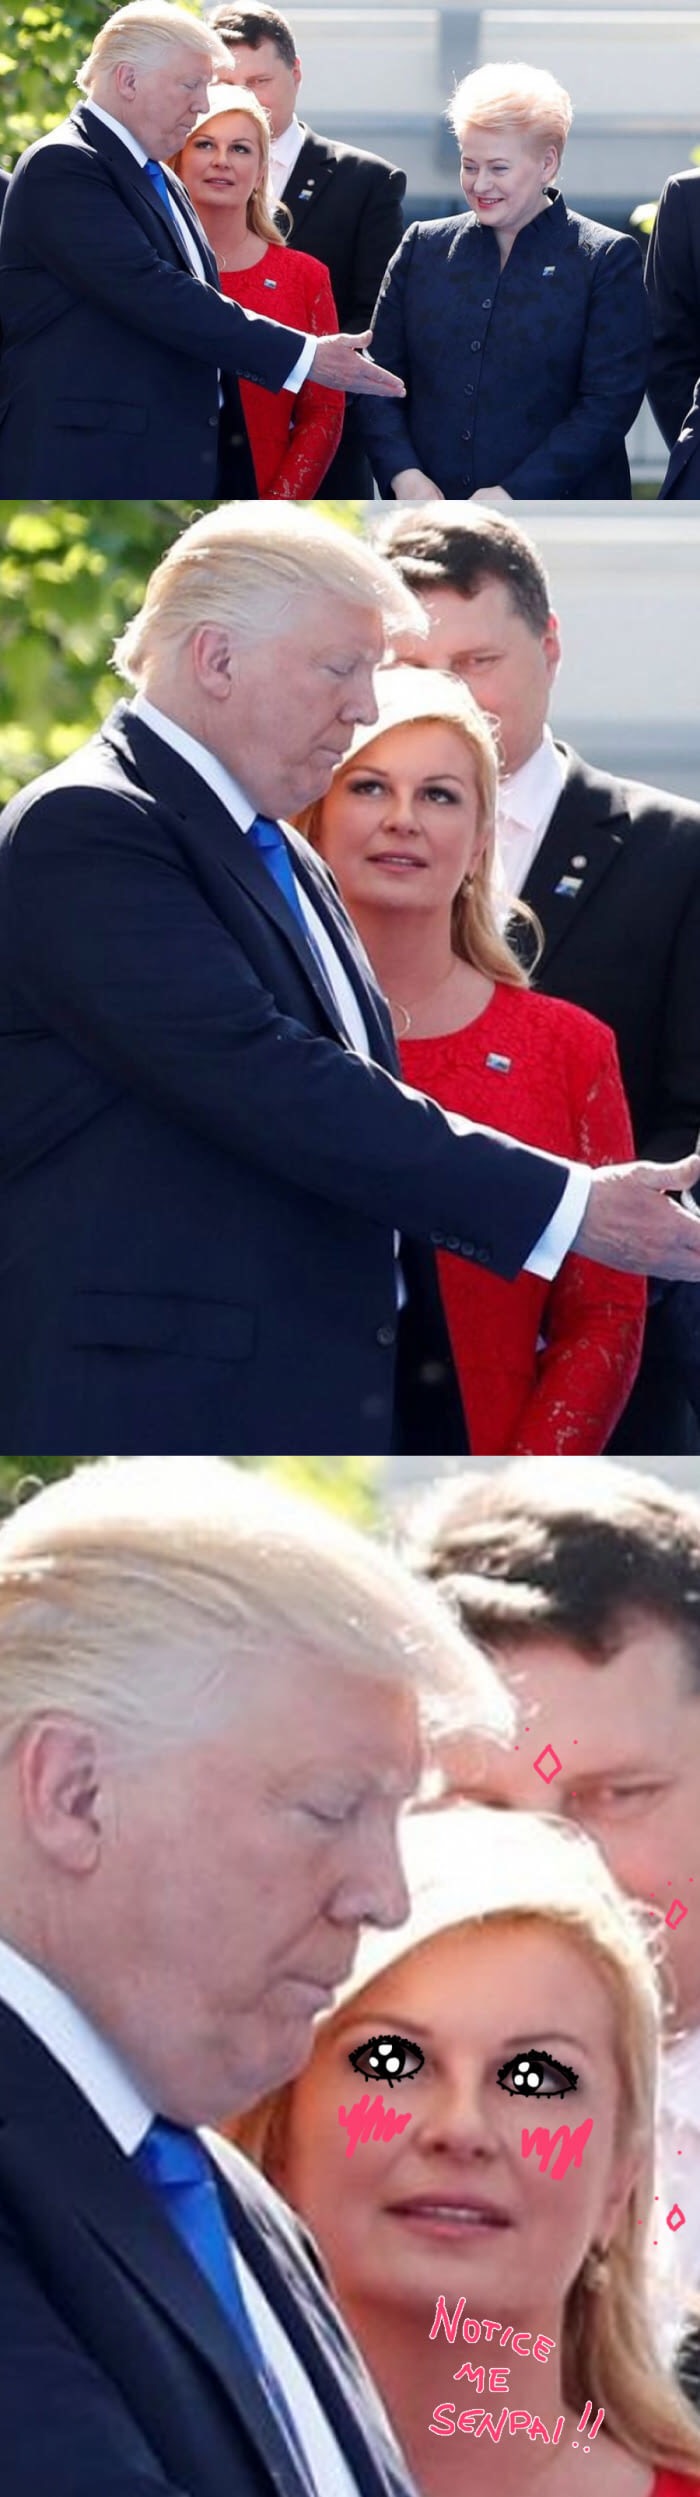 Close up of woman in red dress looking intensively at Donald Trump